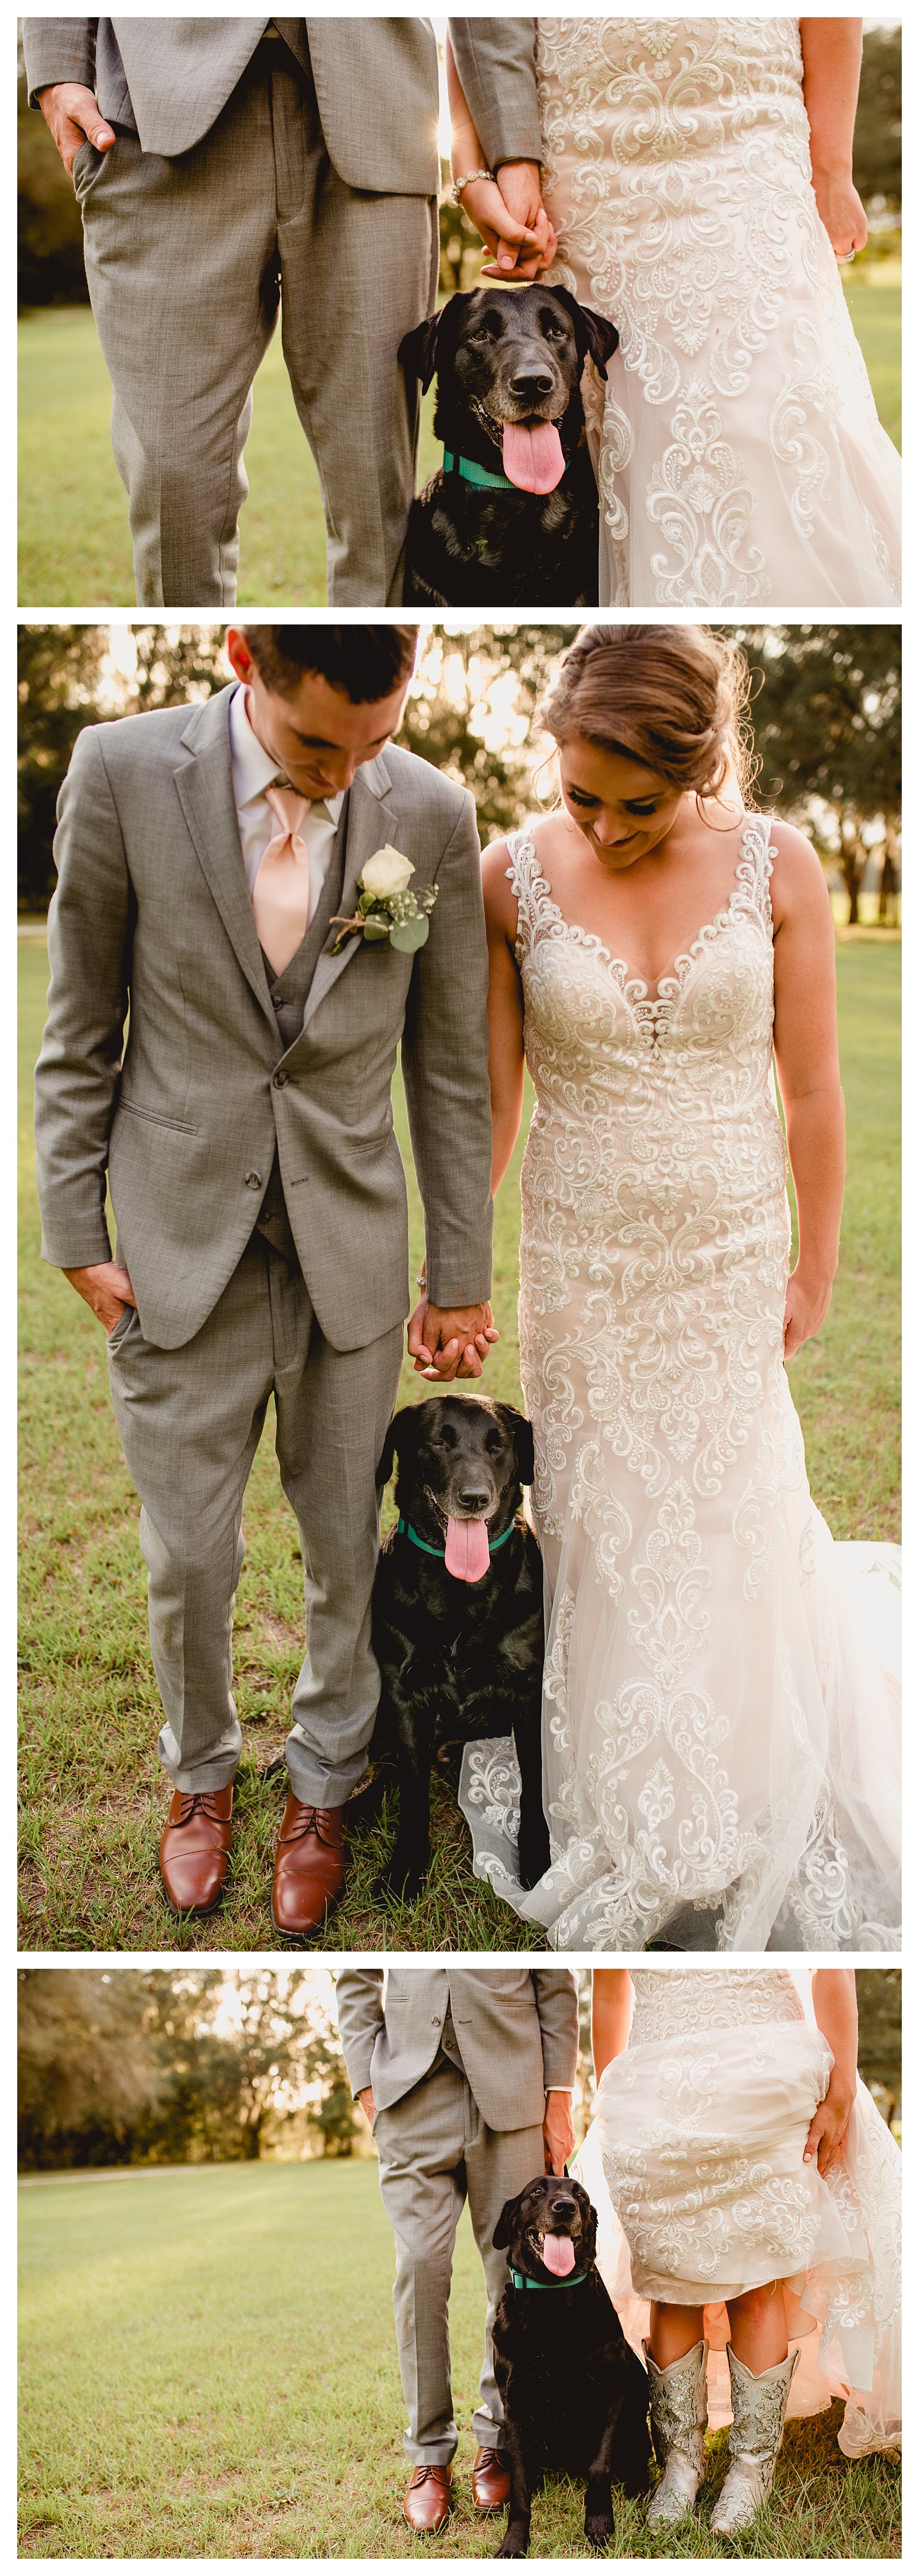 Southern wedding with dog, bride, and groom. Shelly Williams Photography